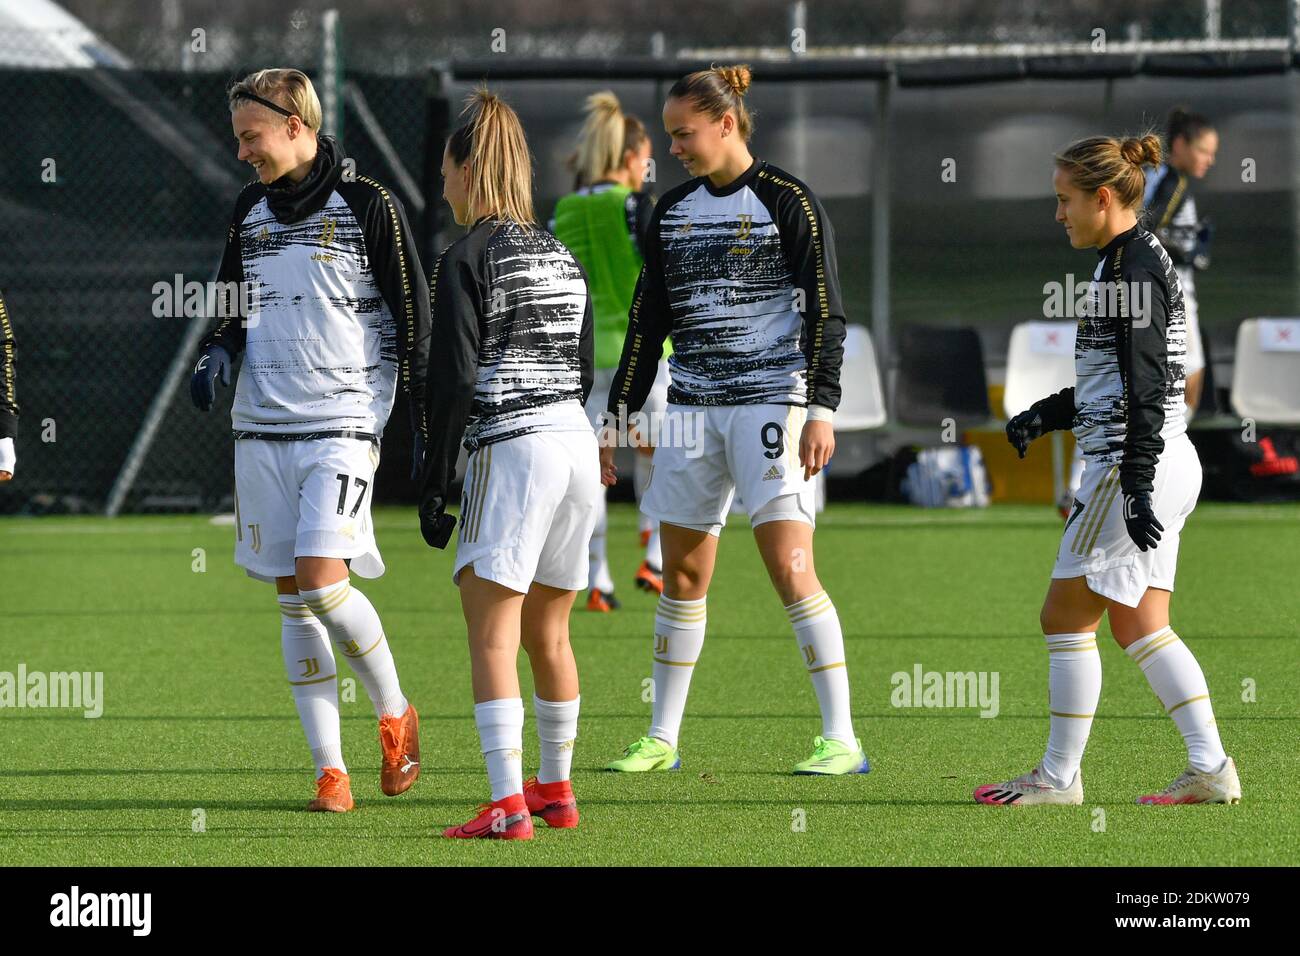 Torino, Italy. 12th, December 2020. Andrea Staskova (9) of Juventus seen  during the warm up for the Serie A Femminile match between Juventus and  Roma Femminile at the Juventus Training Ground in